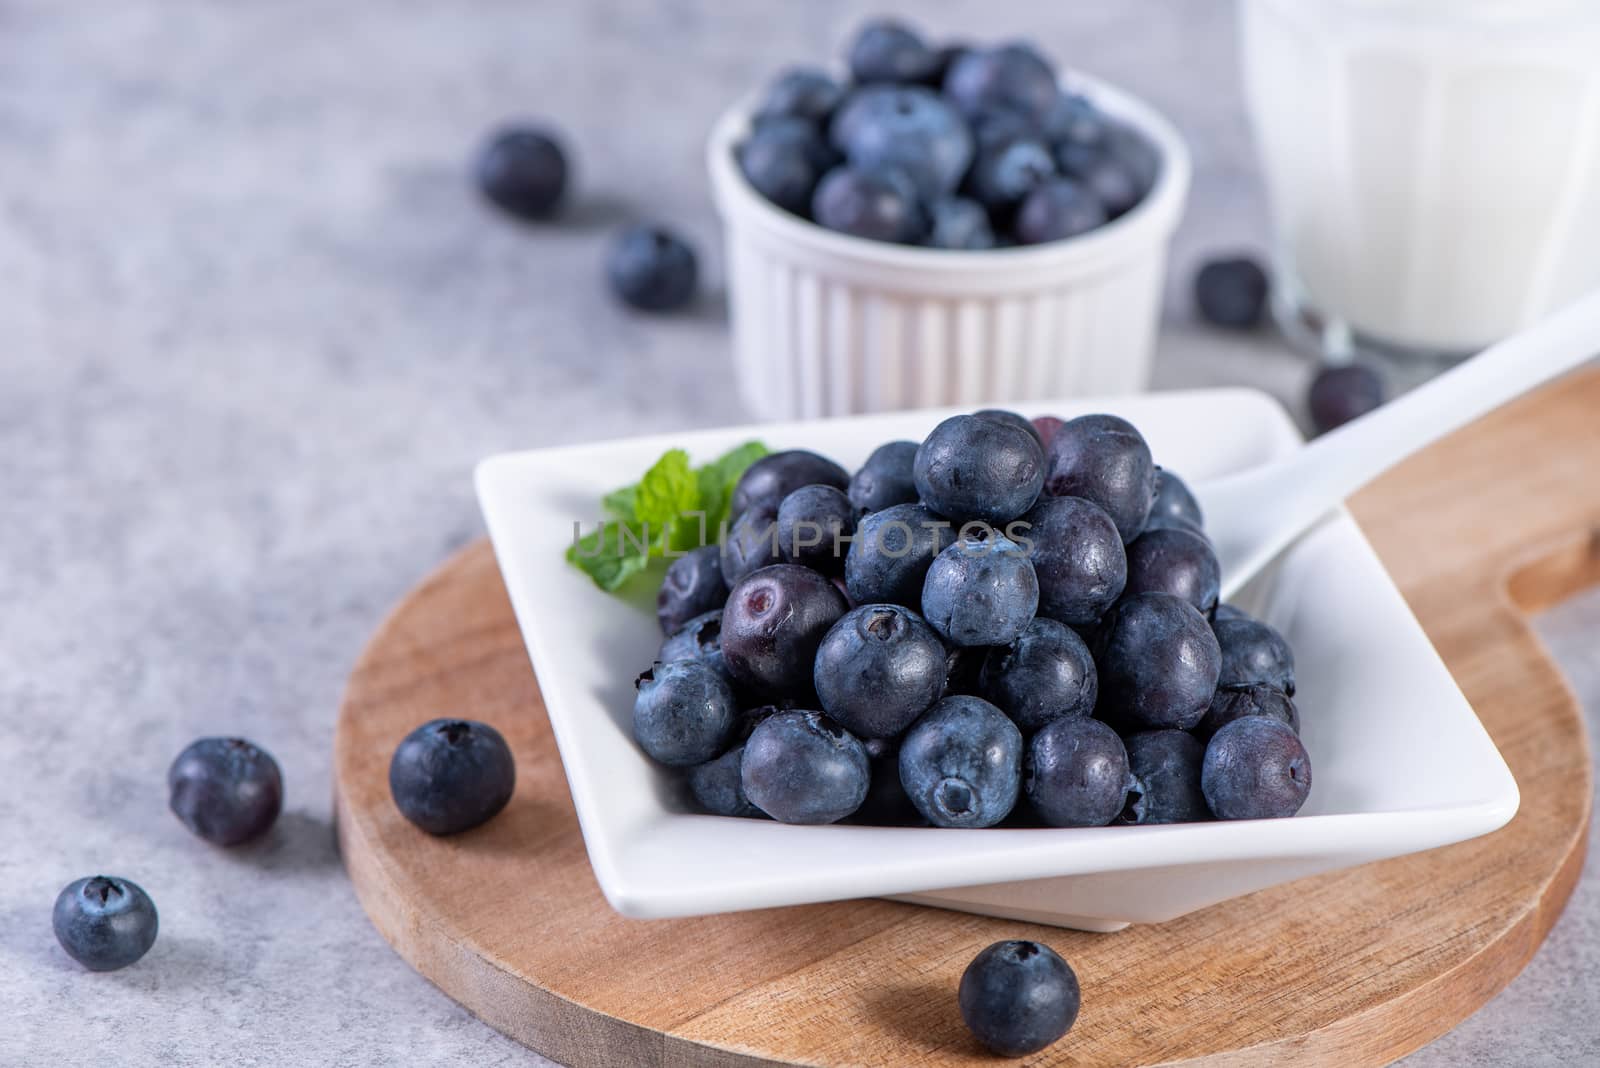 Pile of blueberry fruit in a bowl plate on a tray over gray cement concrete background, close up, healthy eating design concept.